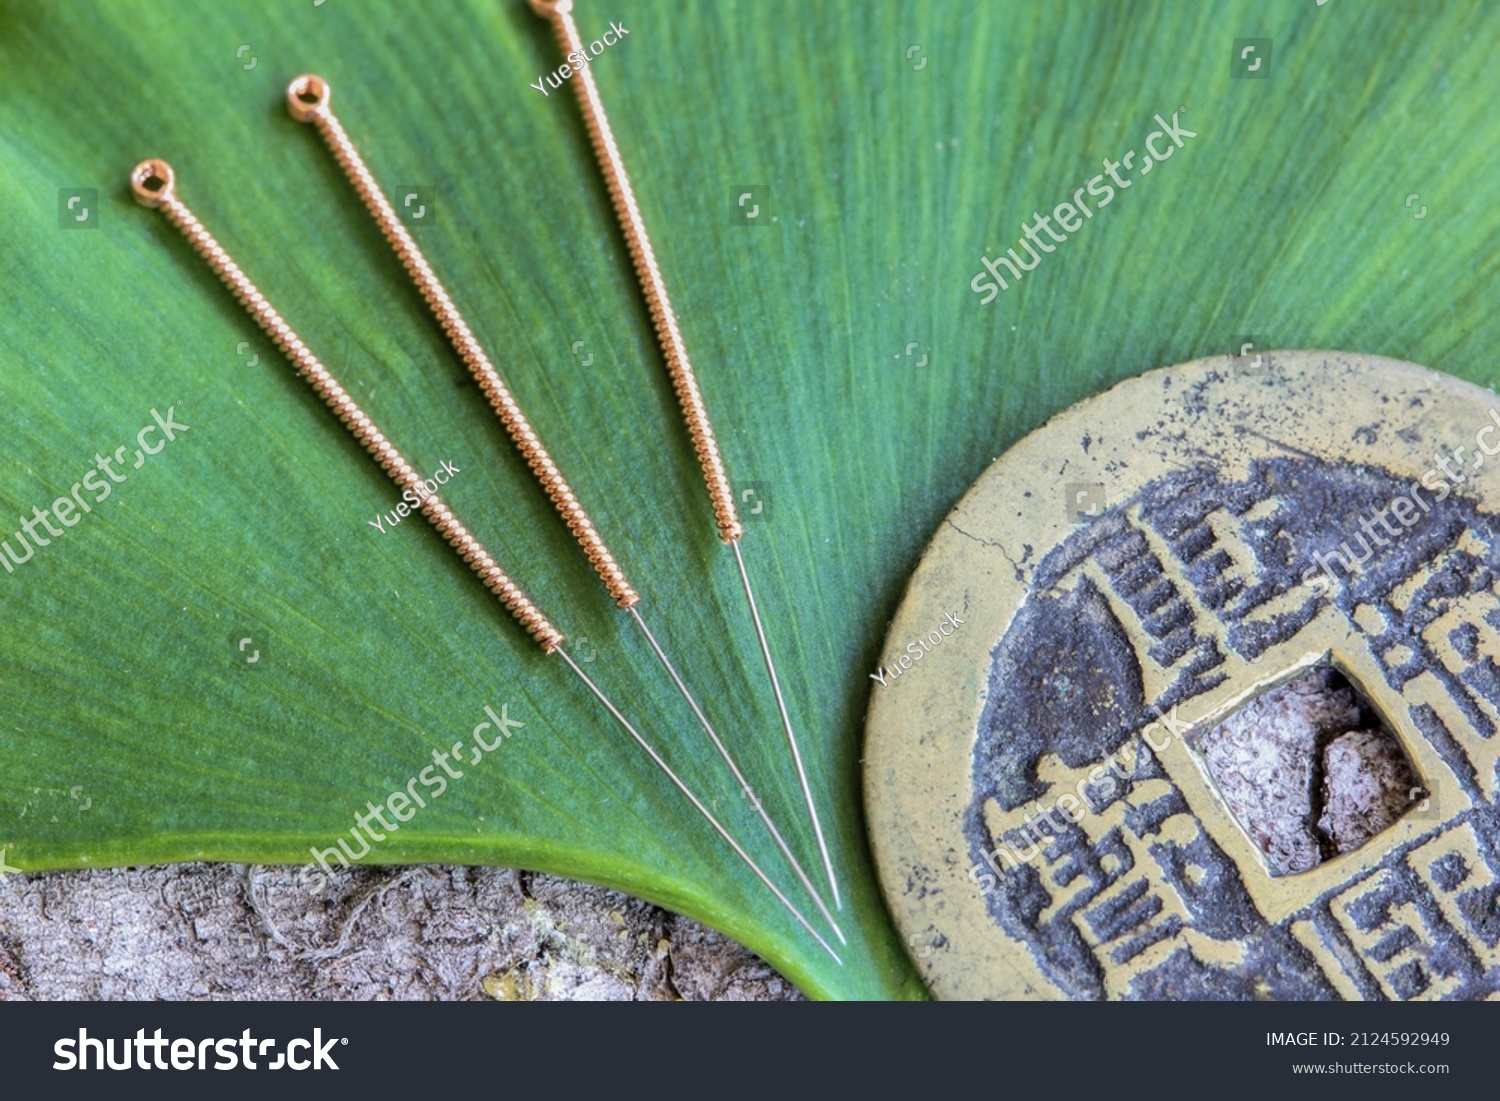 Acupuncture needles on an ancient chinese bronz coin and green ginkgo leaf (Words on the coin: Kangxi Dynasty Coins) - manual focus on needles #2124592949